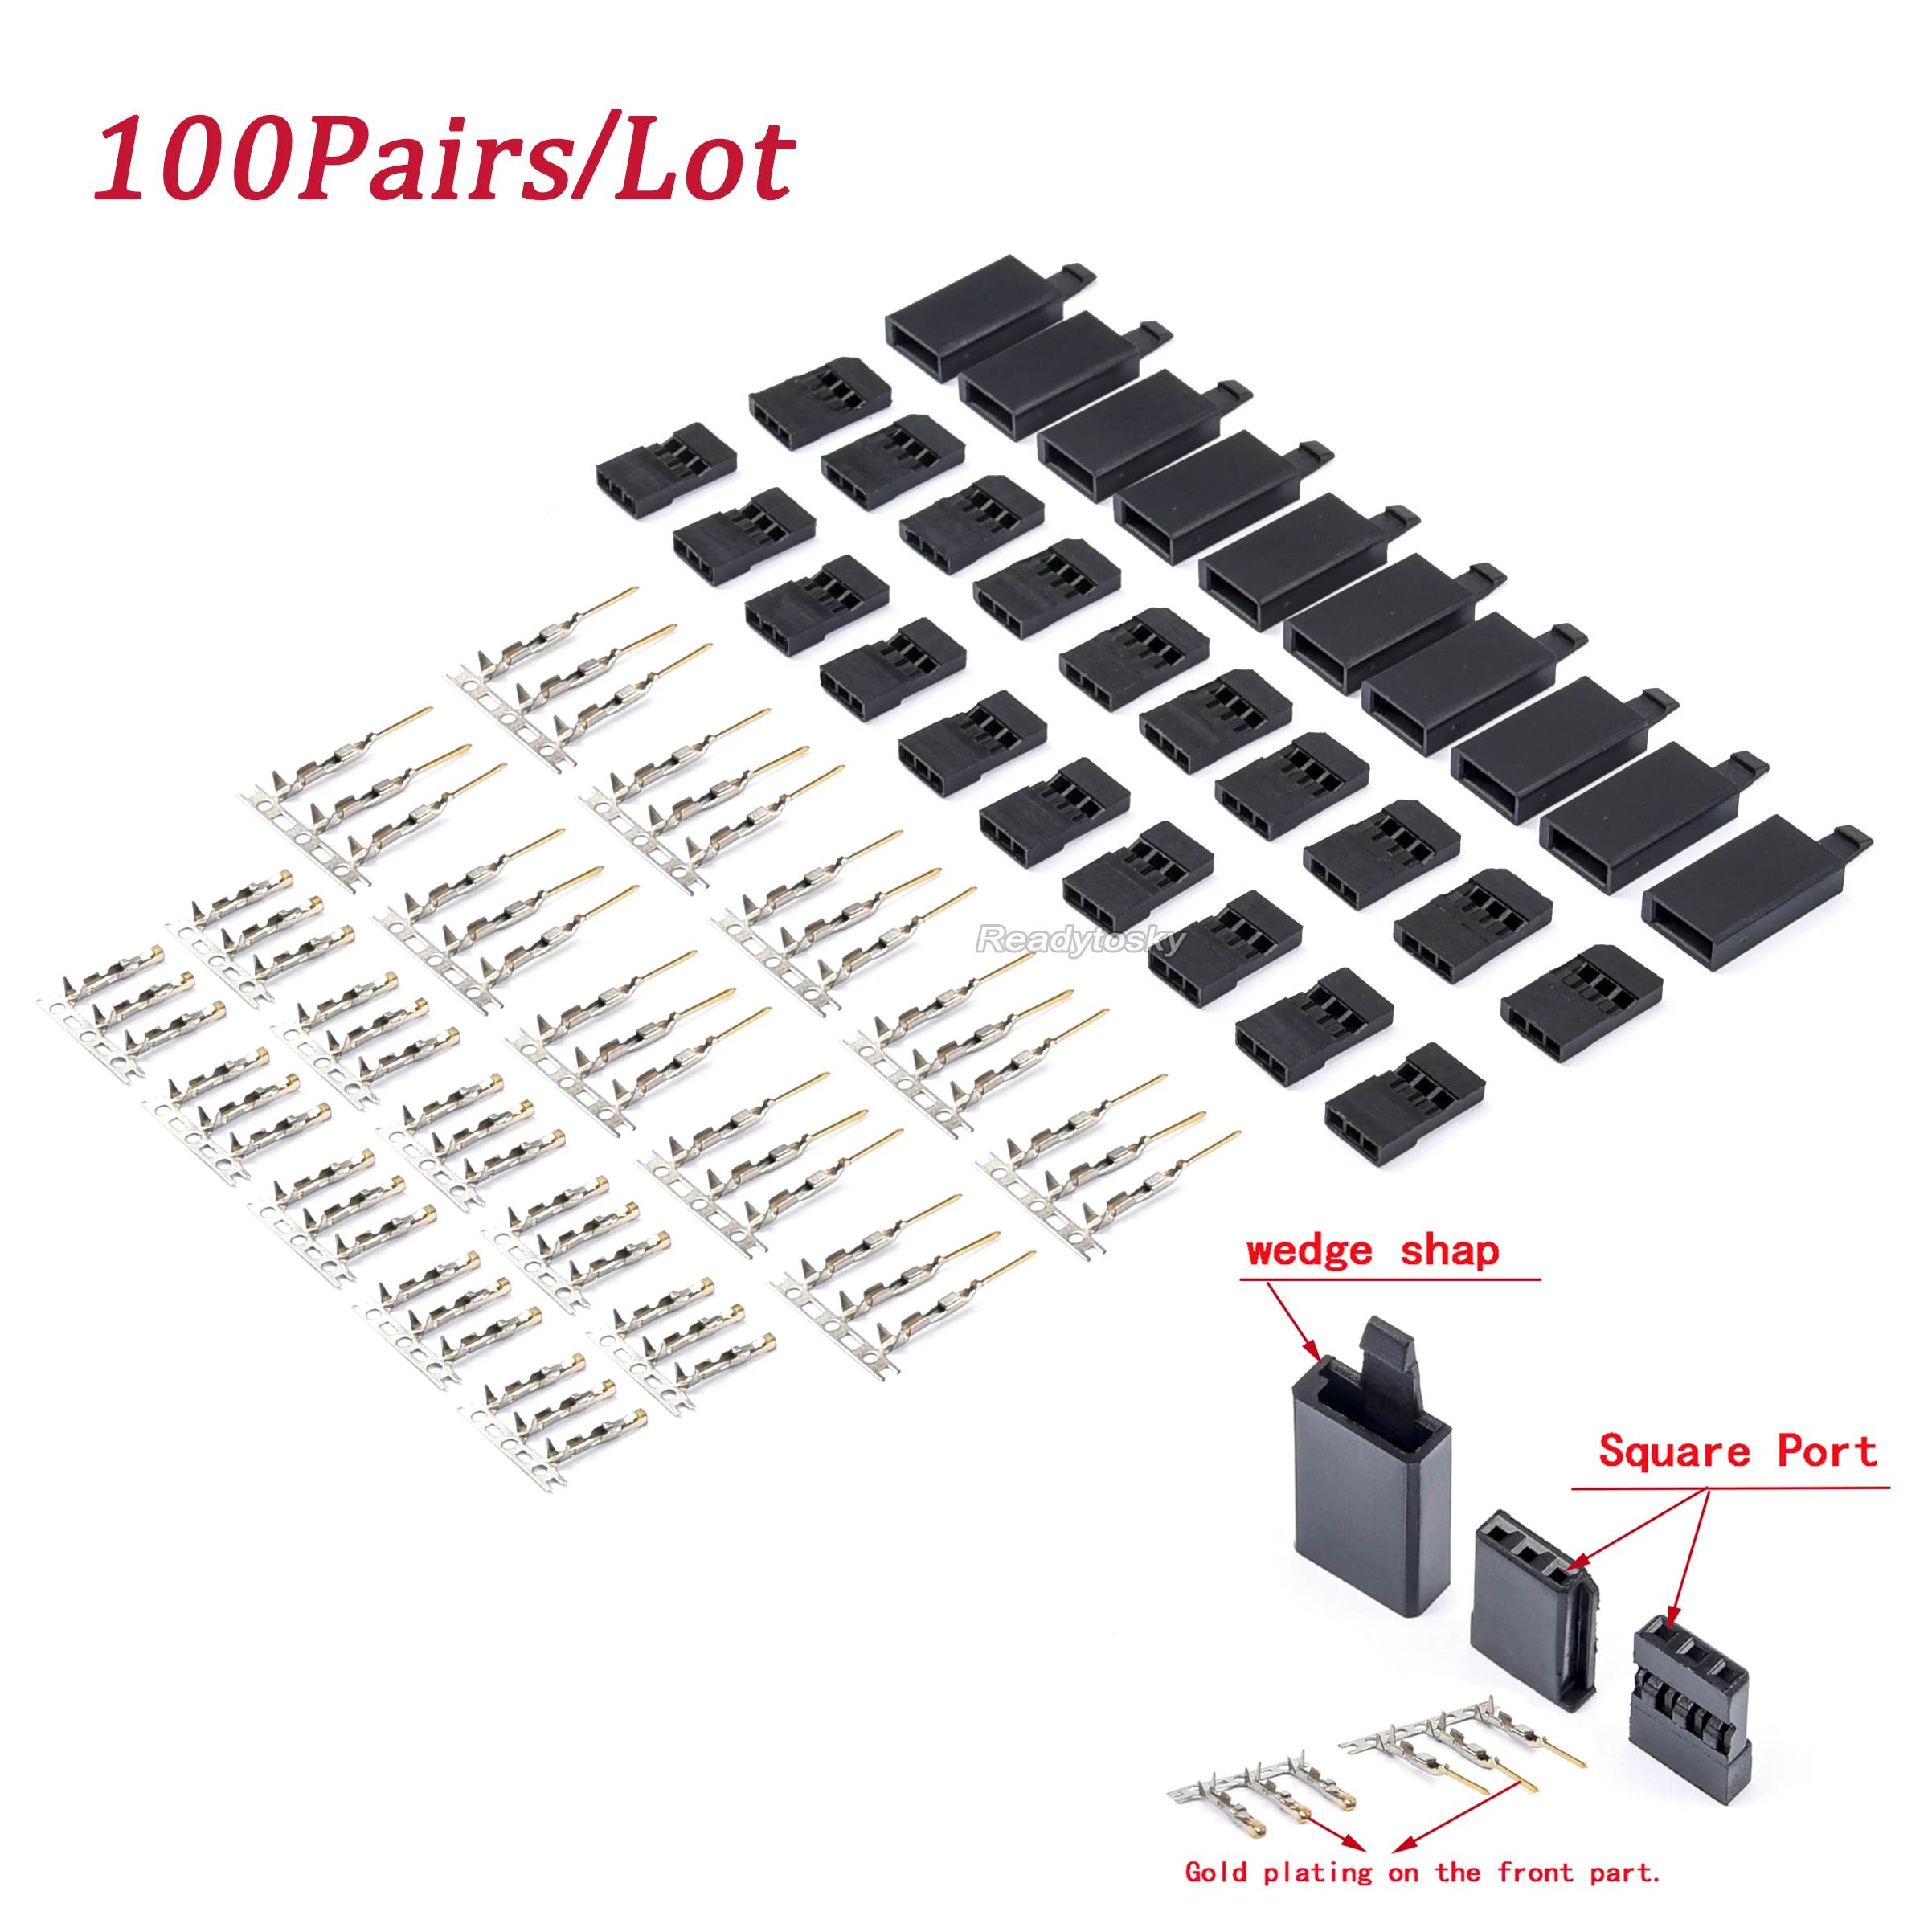 100pairs Servo Receiver Connector Plug with Lock and Male Female Gold Plated terminals Crimp Pin Kit for RC battery